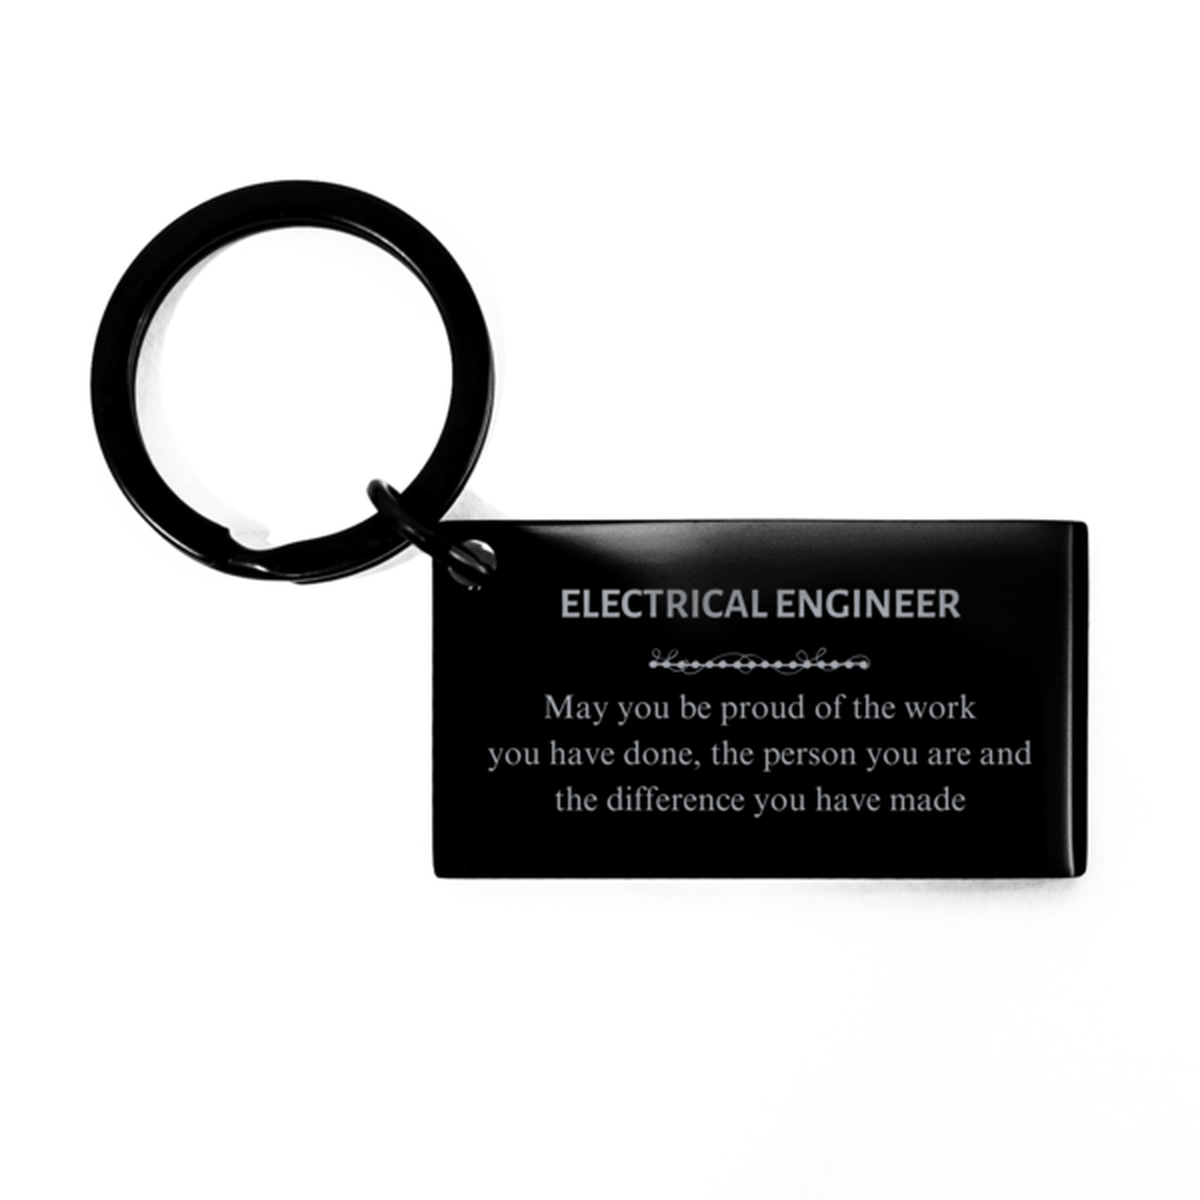 Insurance Adjuster May you be proud of the work you have done, Retirement Electrical Engineer Keychain for Colleague Appreciation Gifts Amazing for Electrical Engineer